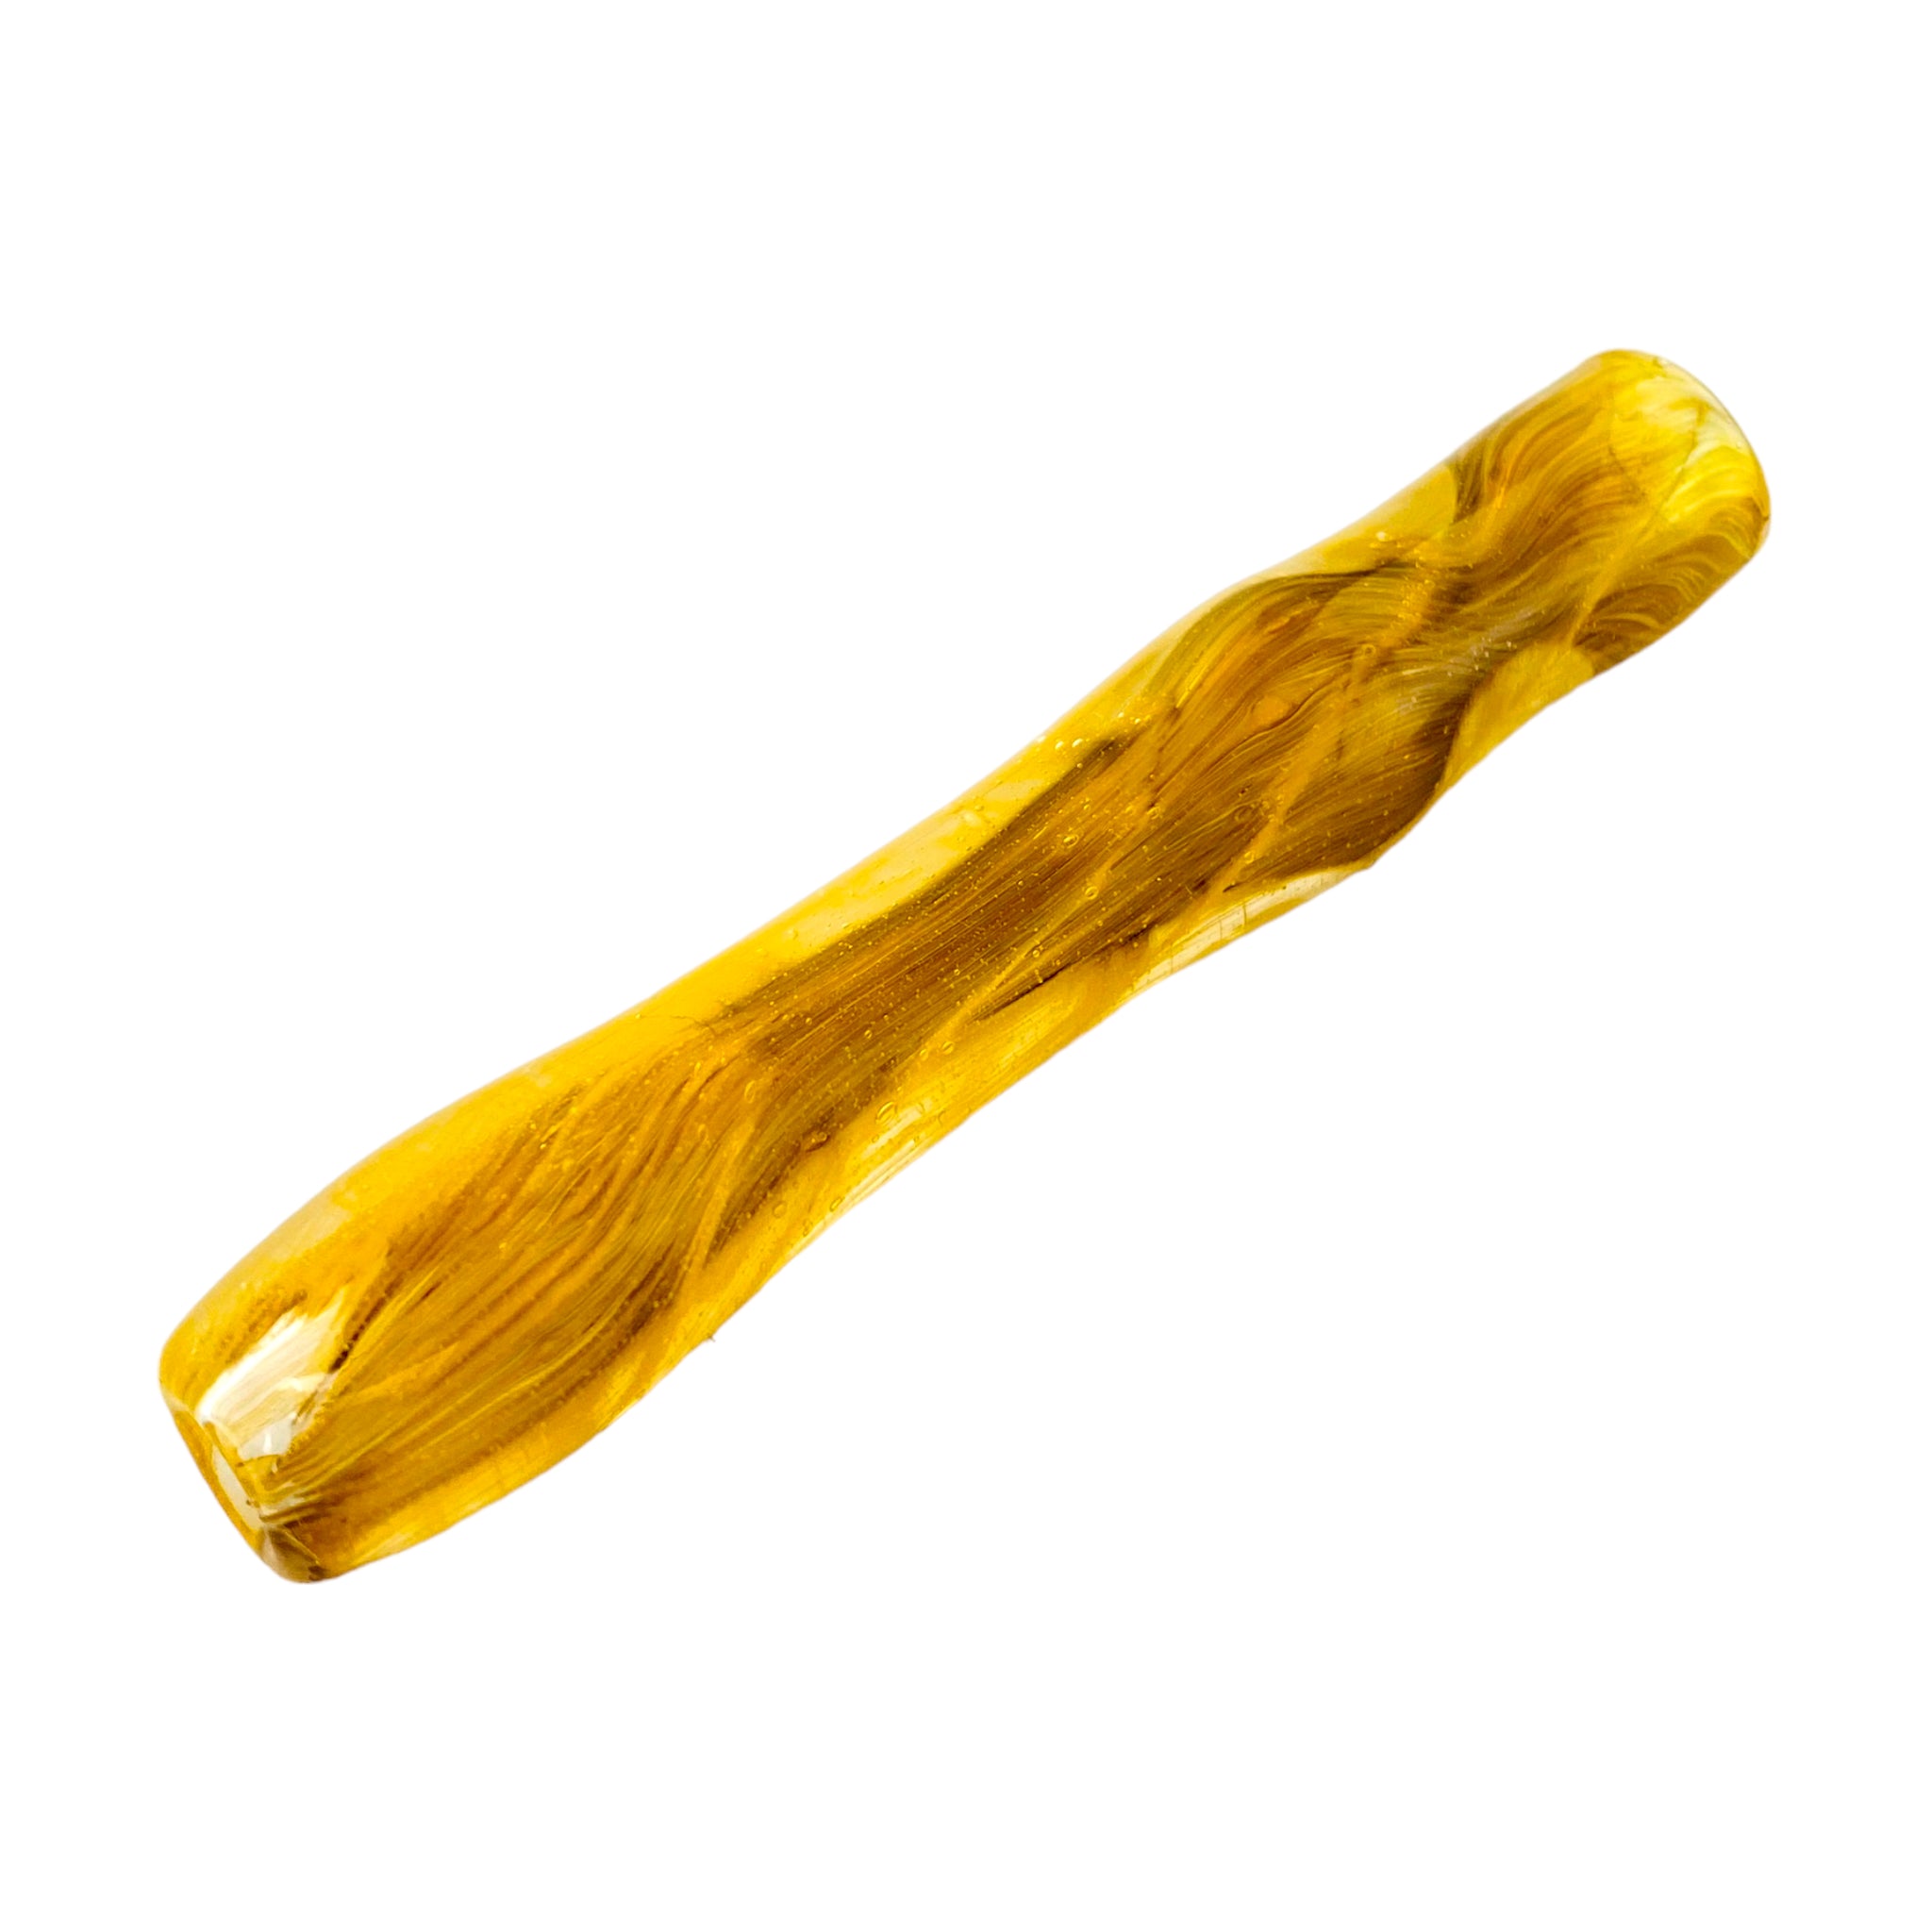 Glass Chillum Pipe - Yellow & Black With Sparkles Glass One Hitter